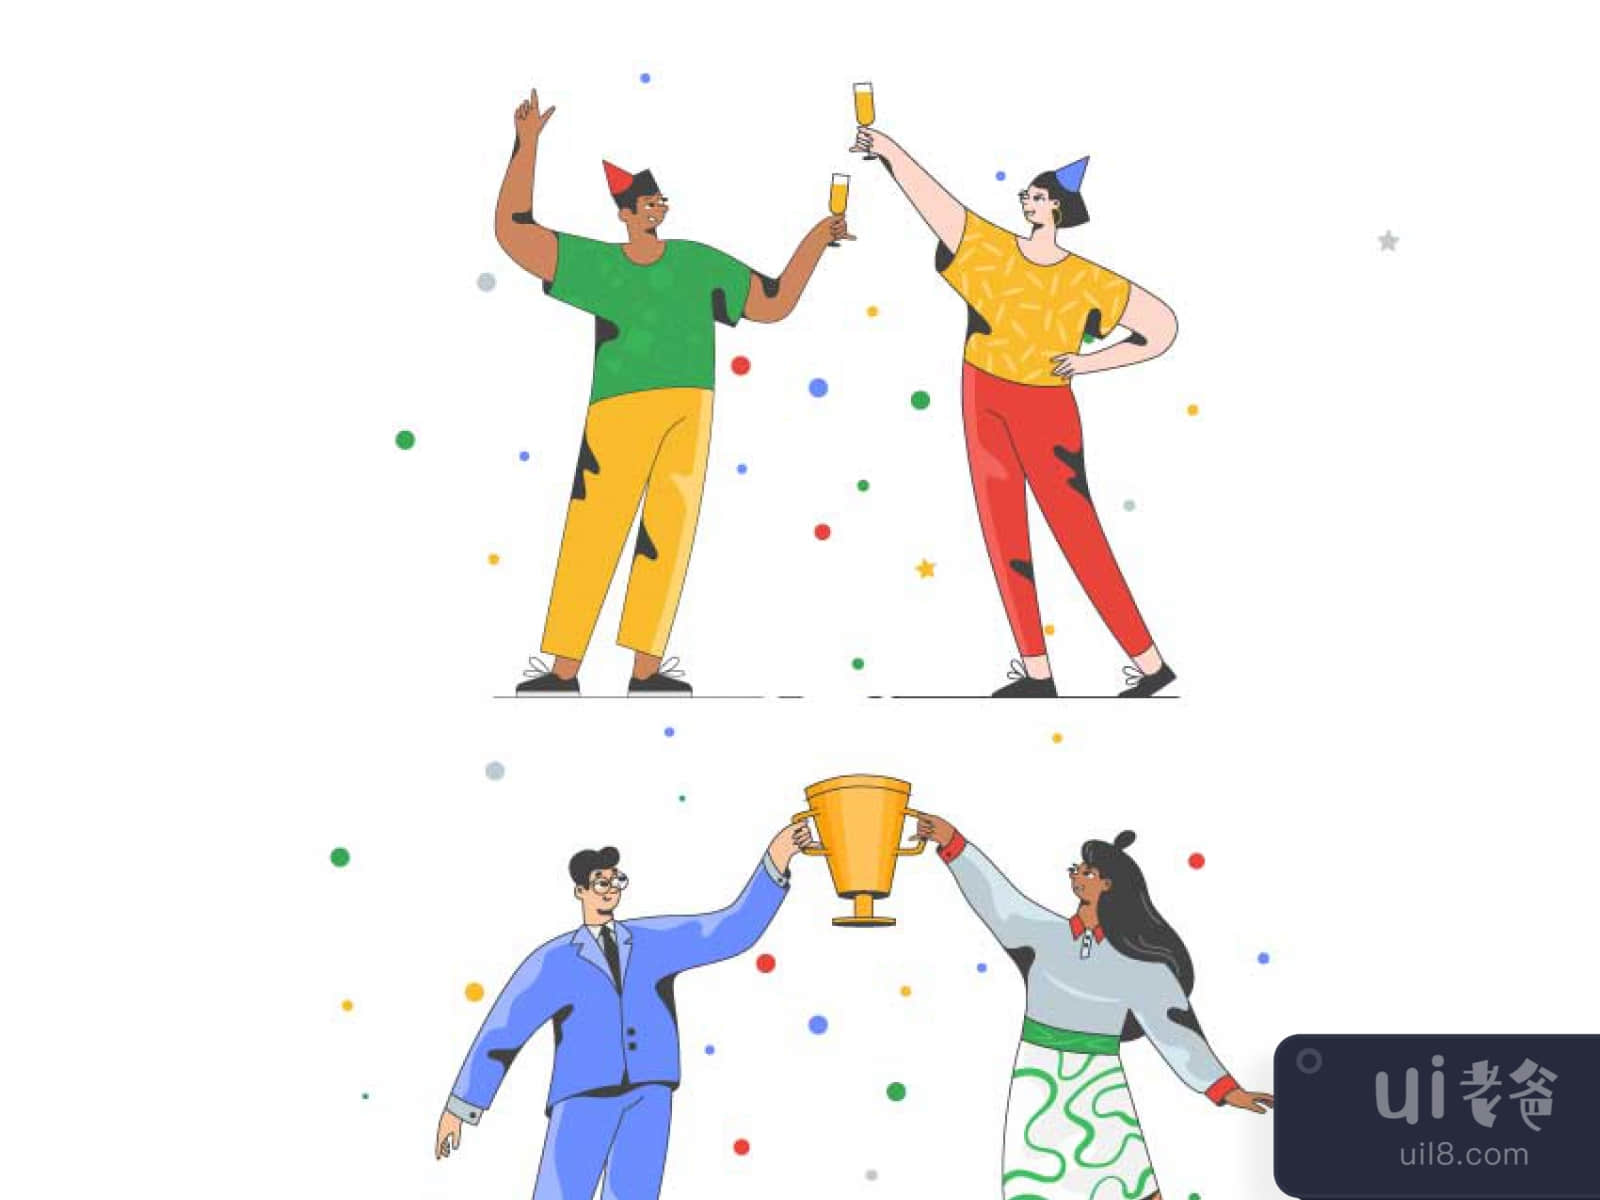 Illustrations of Happy People for Figma and Adobe XD No 1